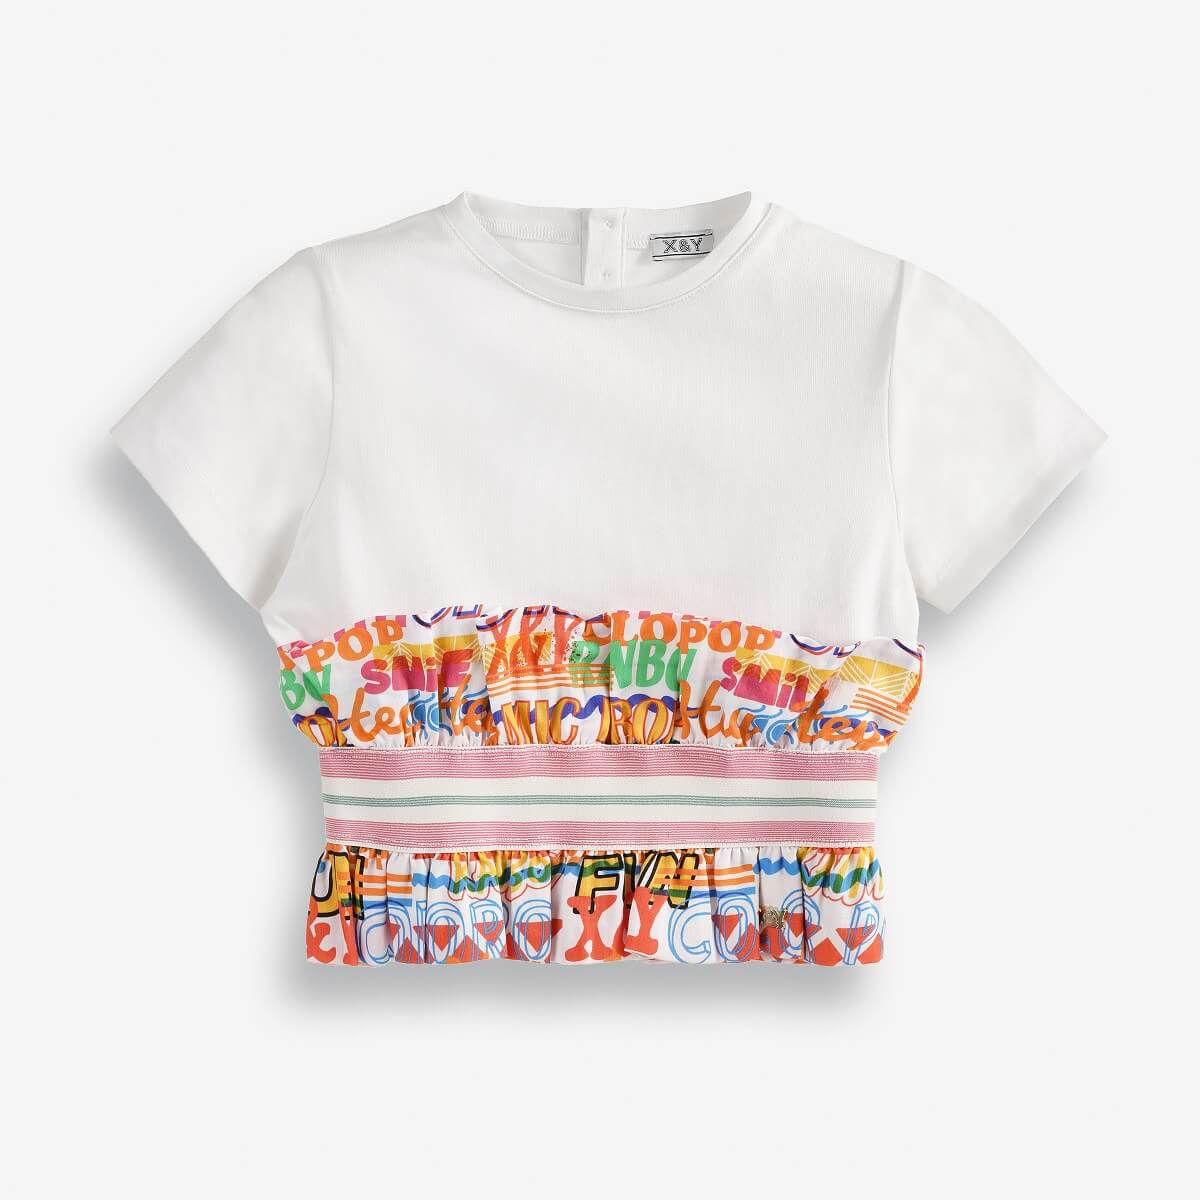 Girls' Cropped T-Shirt Top with White Sleeves and Colorful Text Print